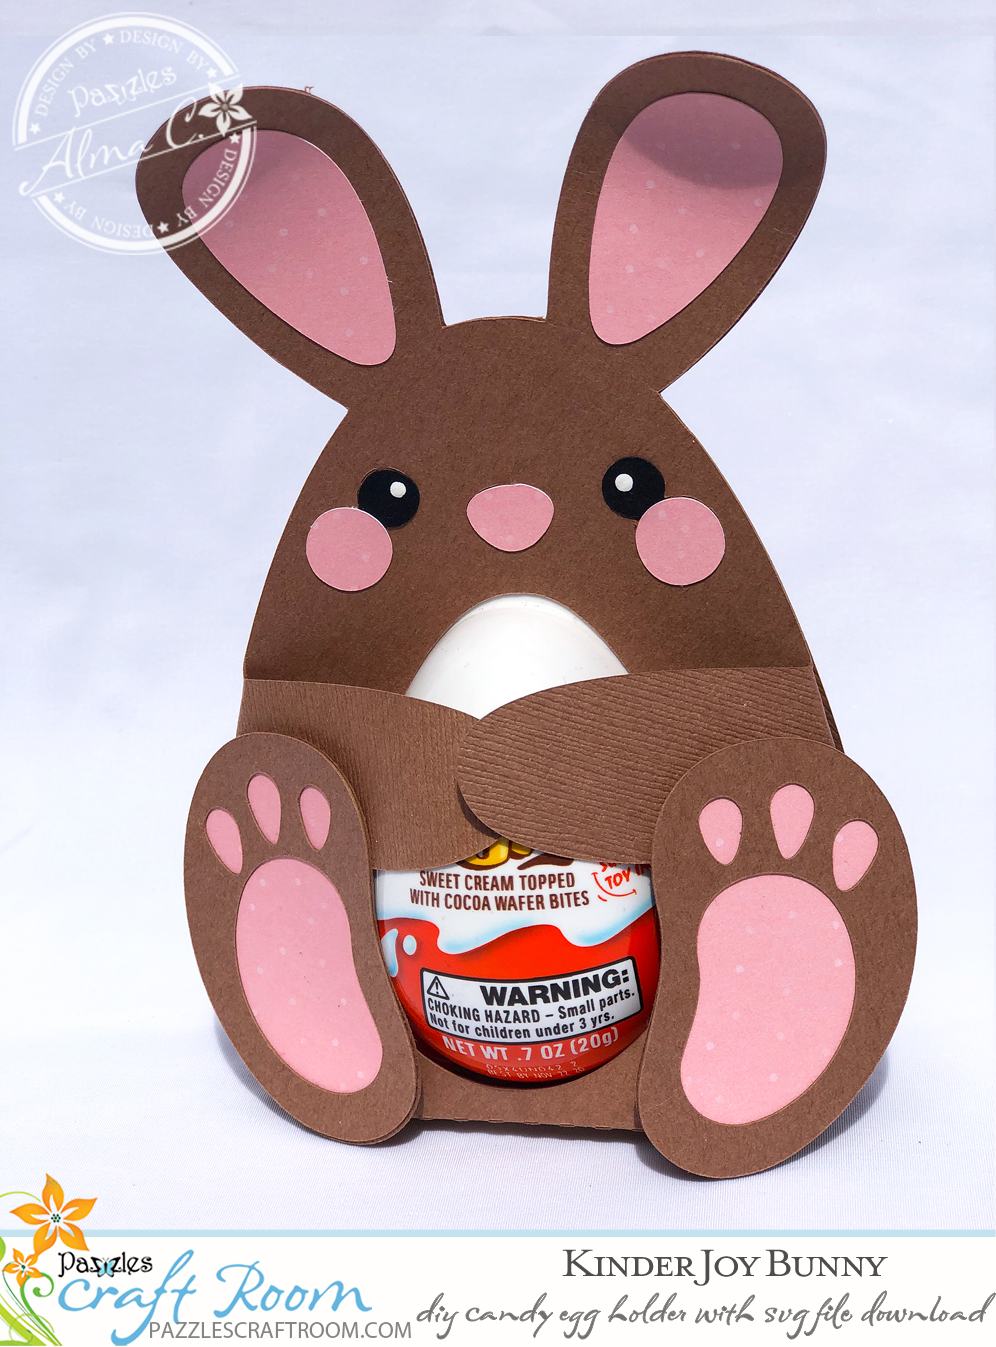 Pazzles DIY Bunny Candy Egg Holder for Kinder Joy with instant SVG download. Compatible with all major electronic cutters including Pazzles Inspiration, Cricut, and Silhouette Cameo. Design by Alma Cervantes.